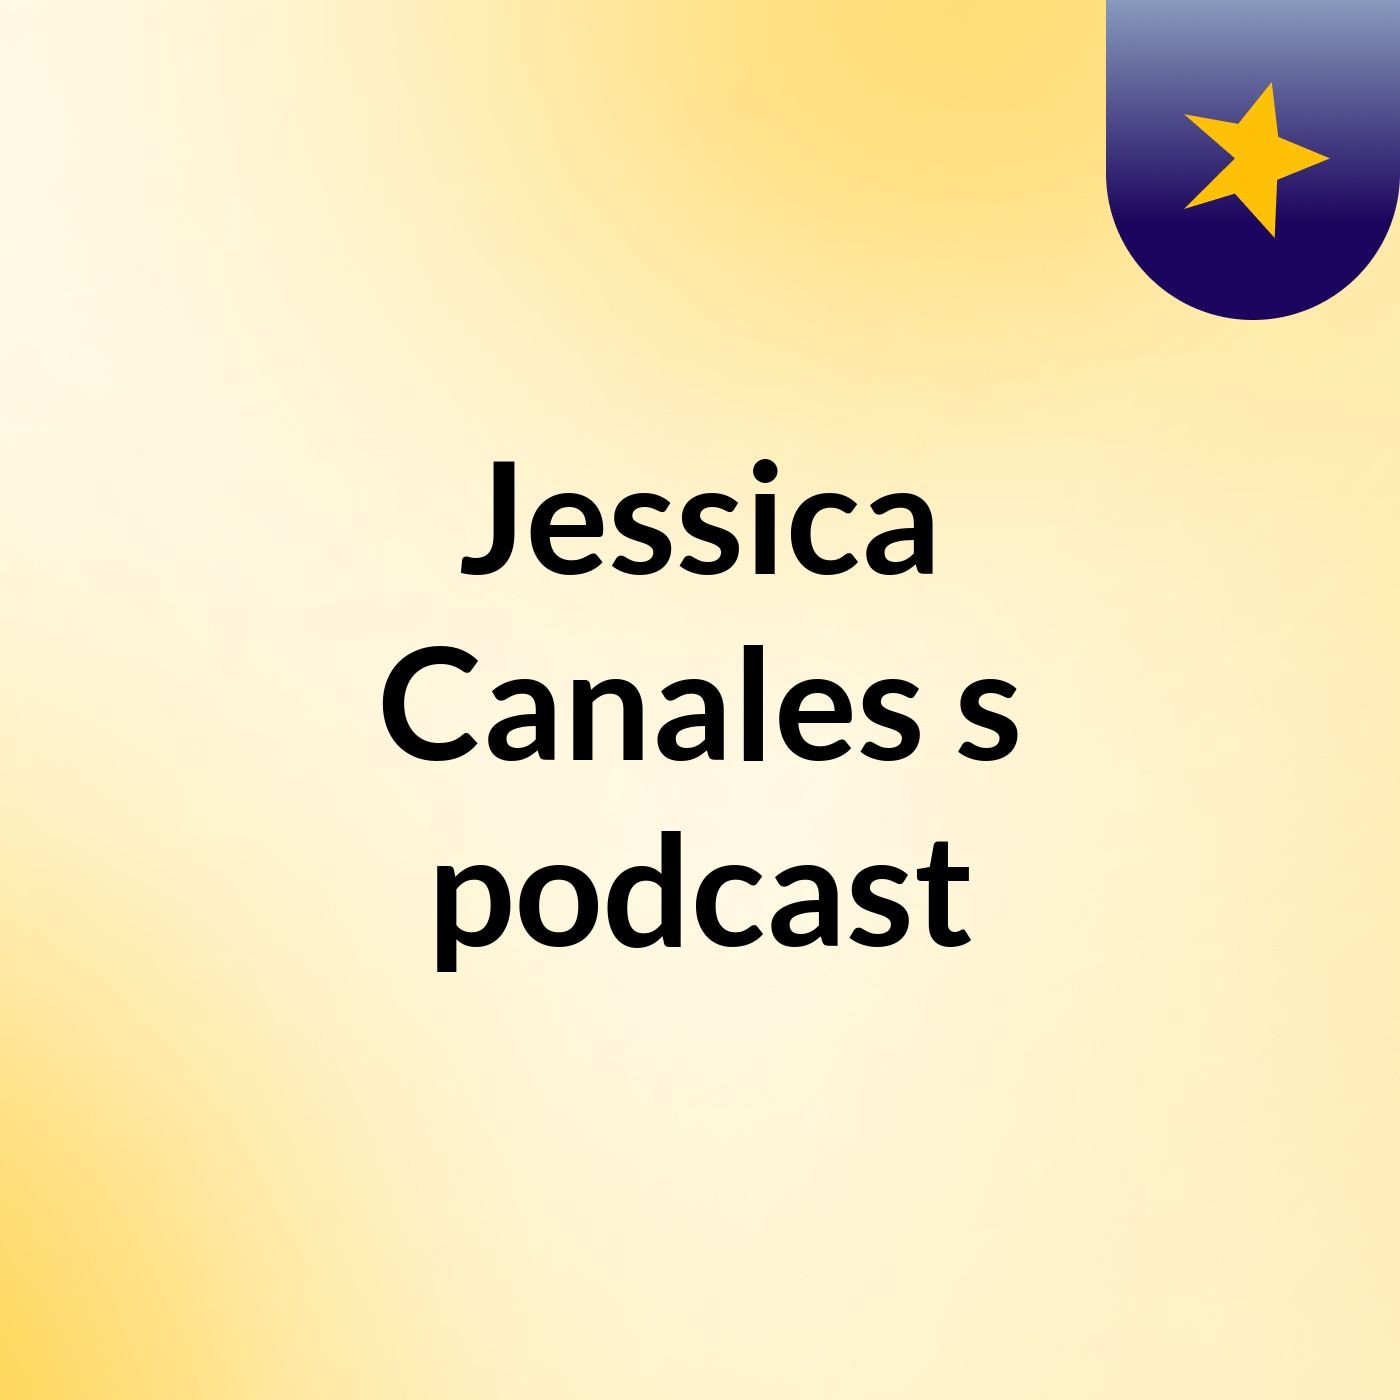 Jessica Canales's podcast